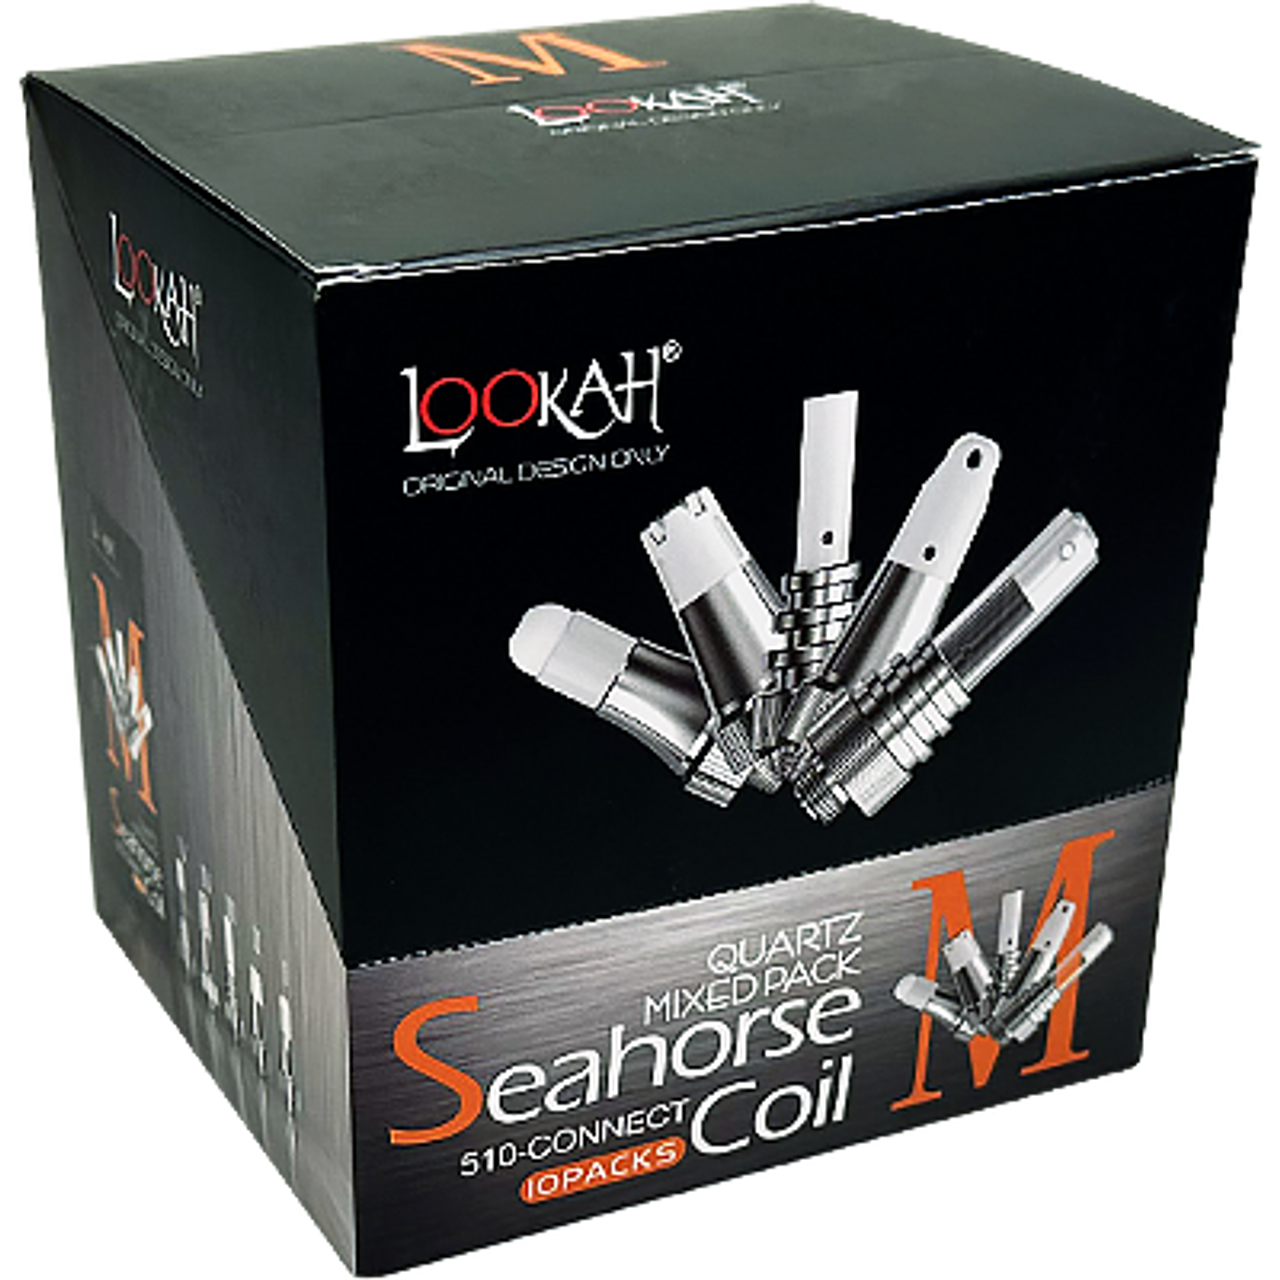 Lookah Seahorse Coil M - Assorted 510 Thread Coils | 5 Pack